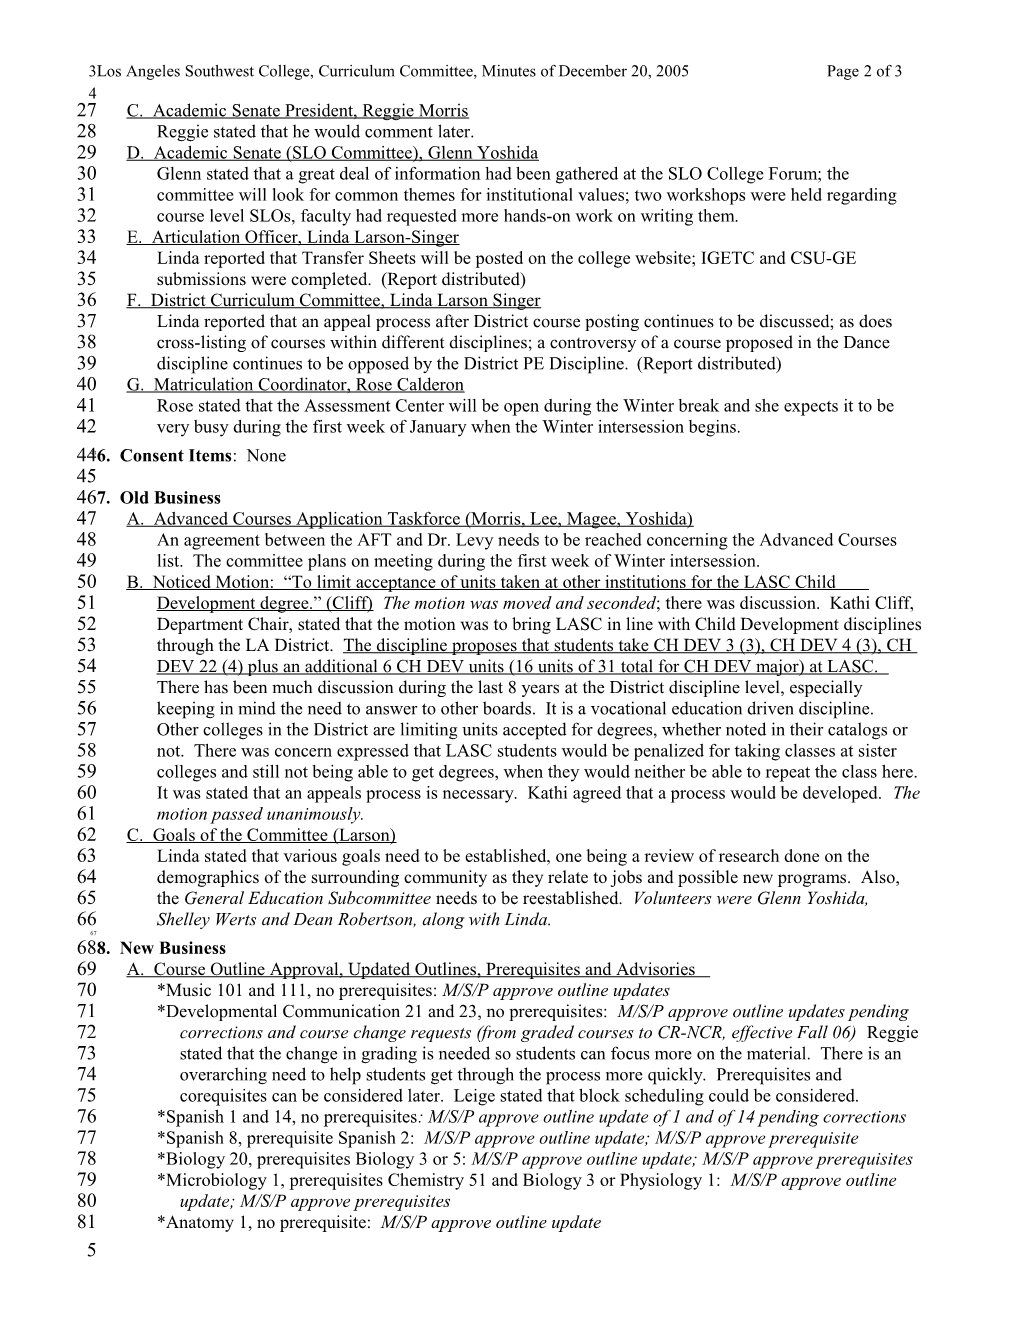 Los Angeles Southwest College, Curriculum Committee, Minutes of December 20, 2005 Page 1 of 3